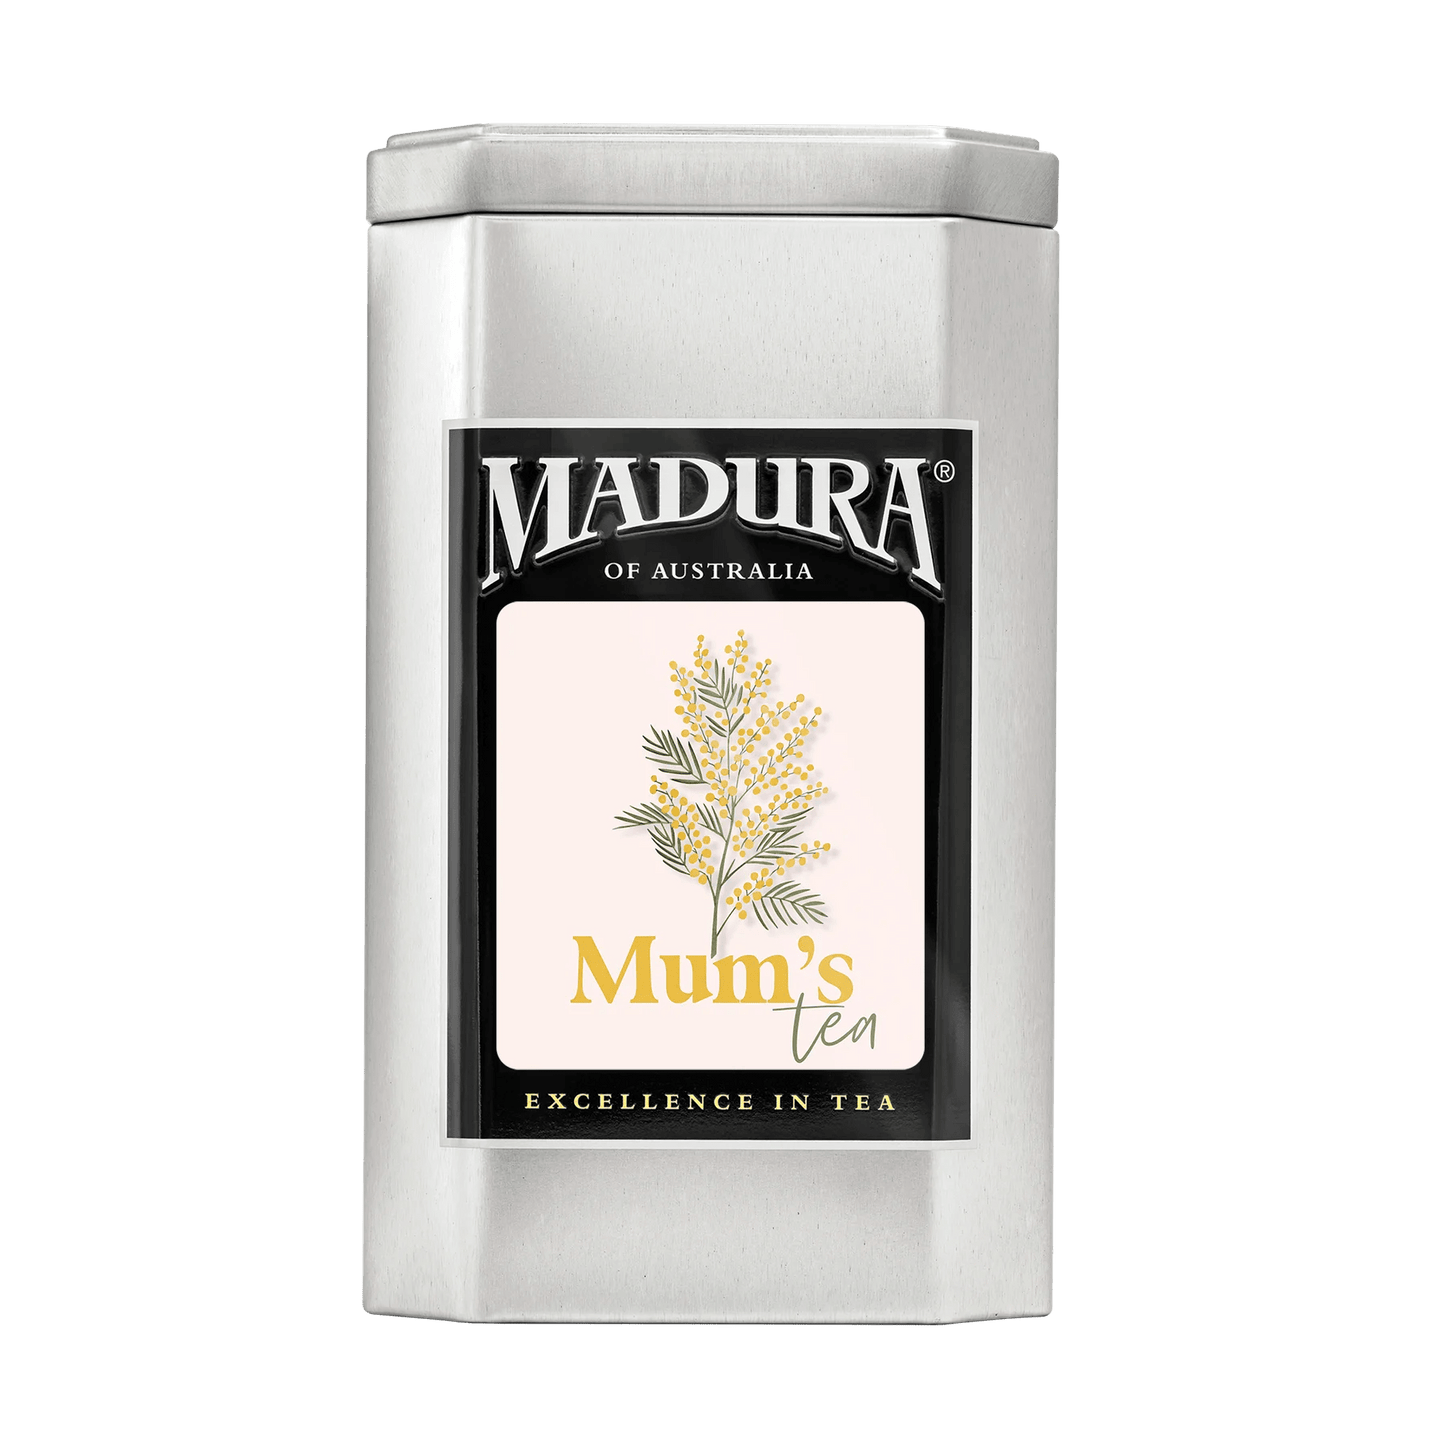 44 Tea Bags Caddy with Mothers Day Floral 1 Label - Madura Tea